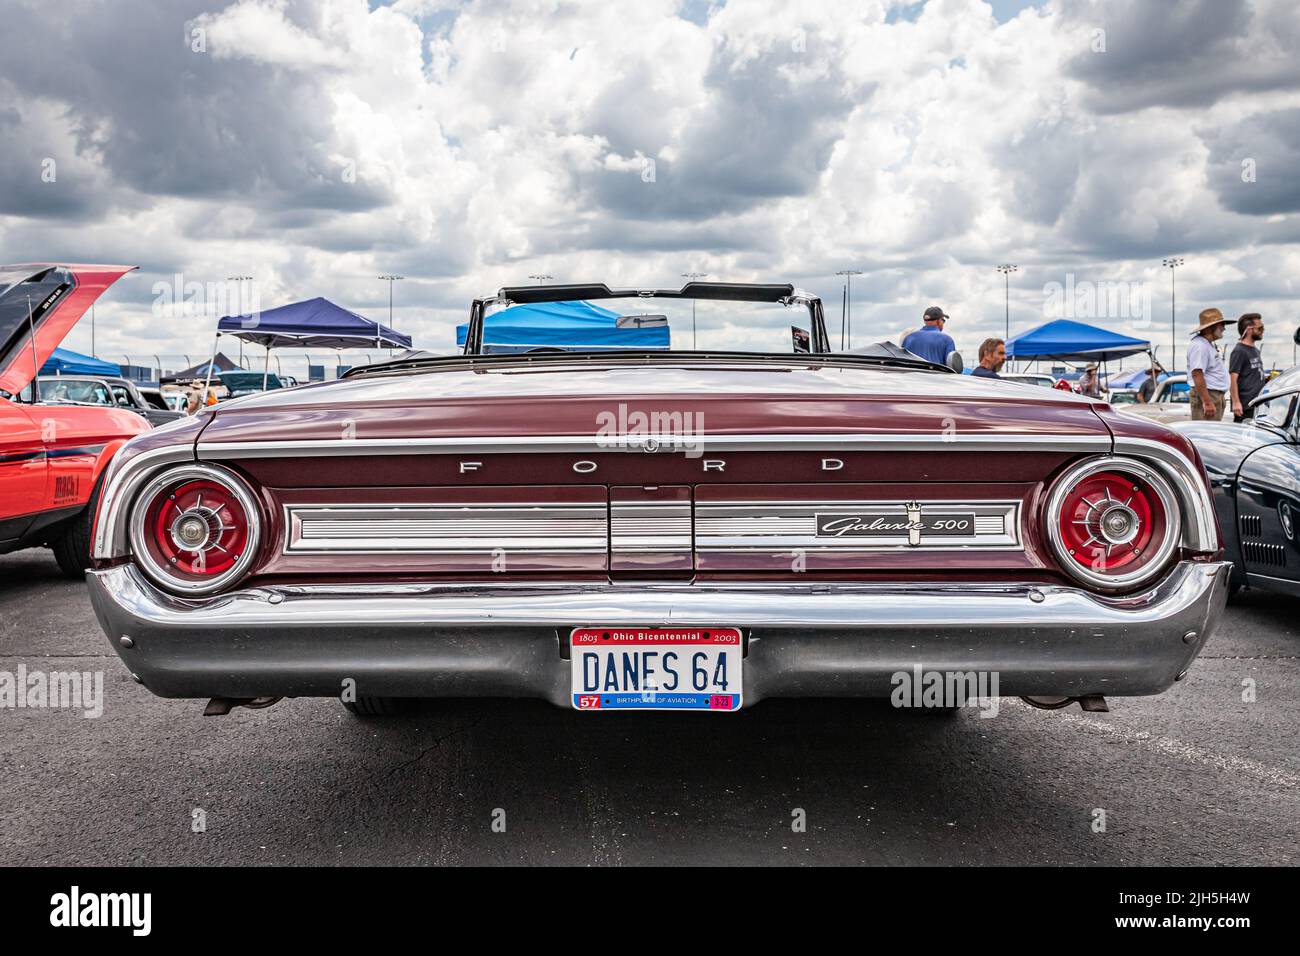 Lebanon, TN - May 14, 2022: Low perspective rear view of a 1964 Ford Galaxie 500 Convertible at a local car show. Stock Photo